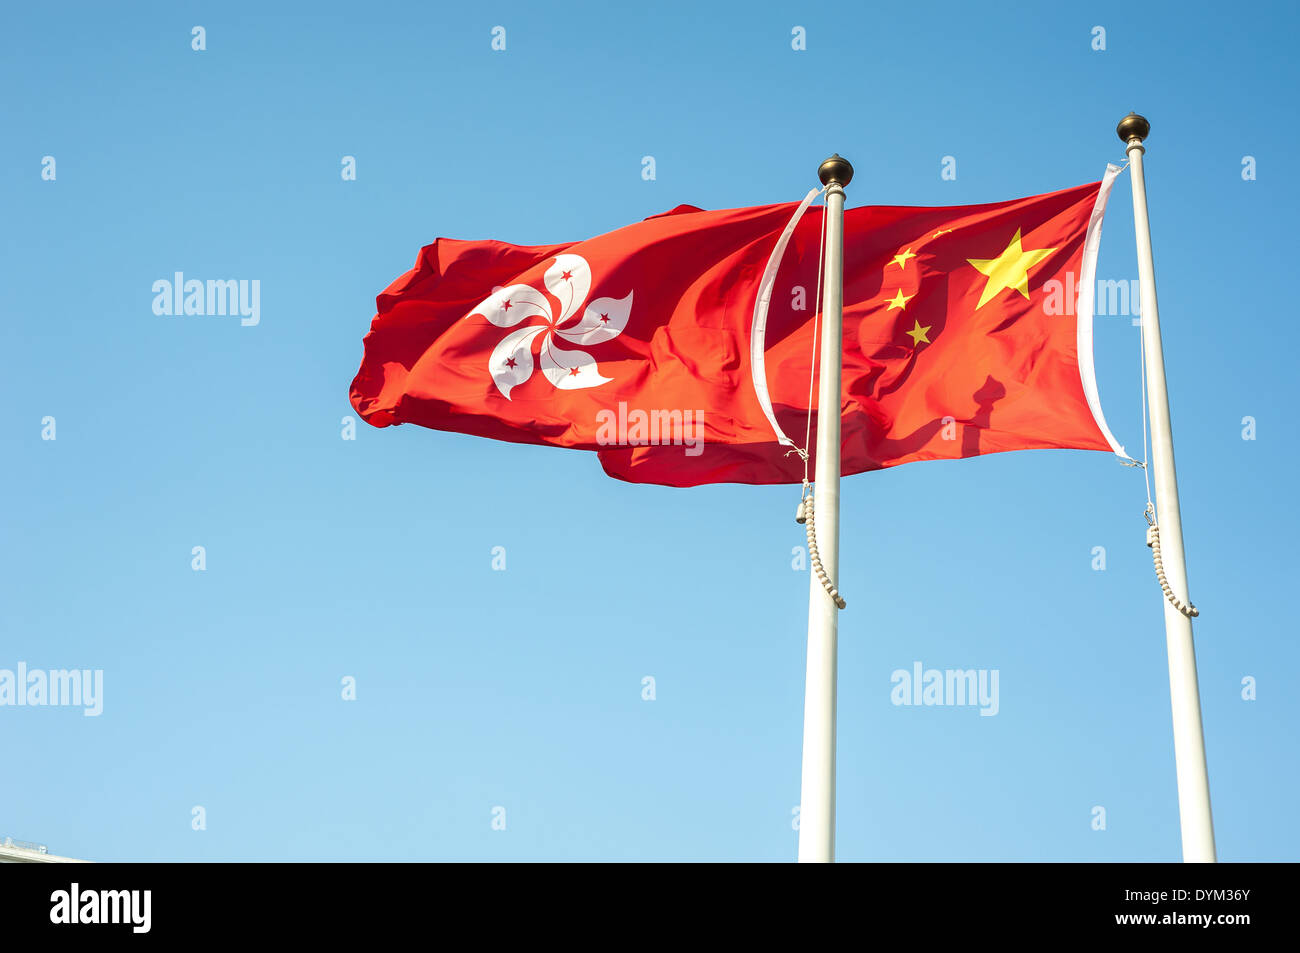 Hong Kong and China national flags flying against a blue sky Stock Photo